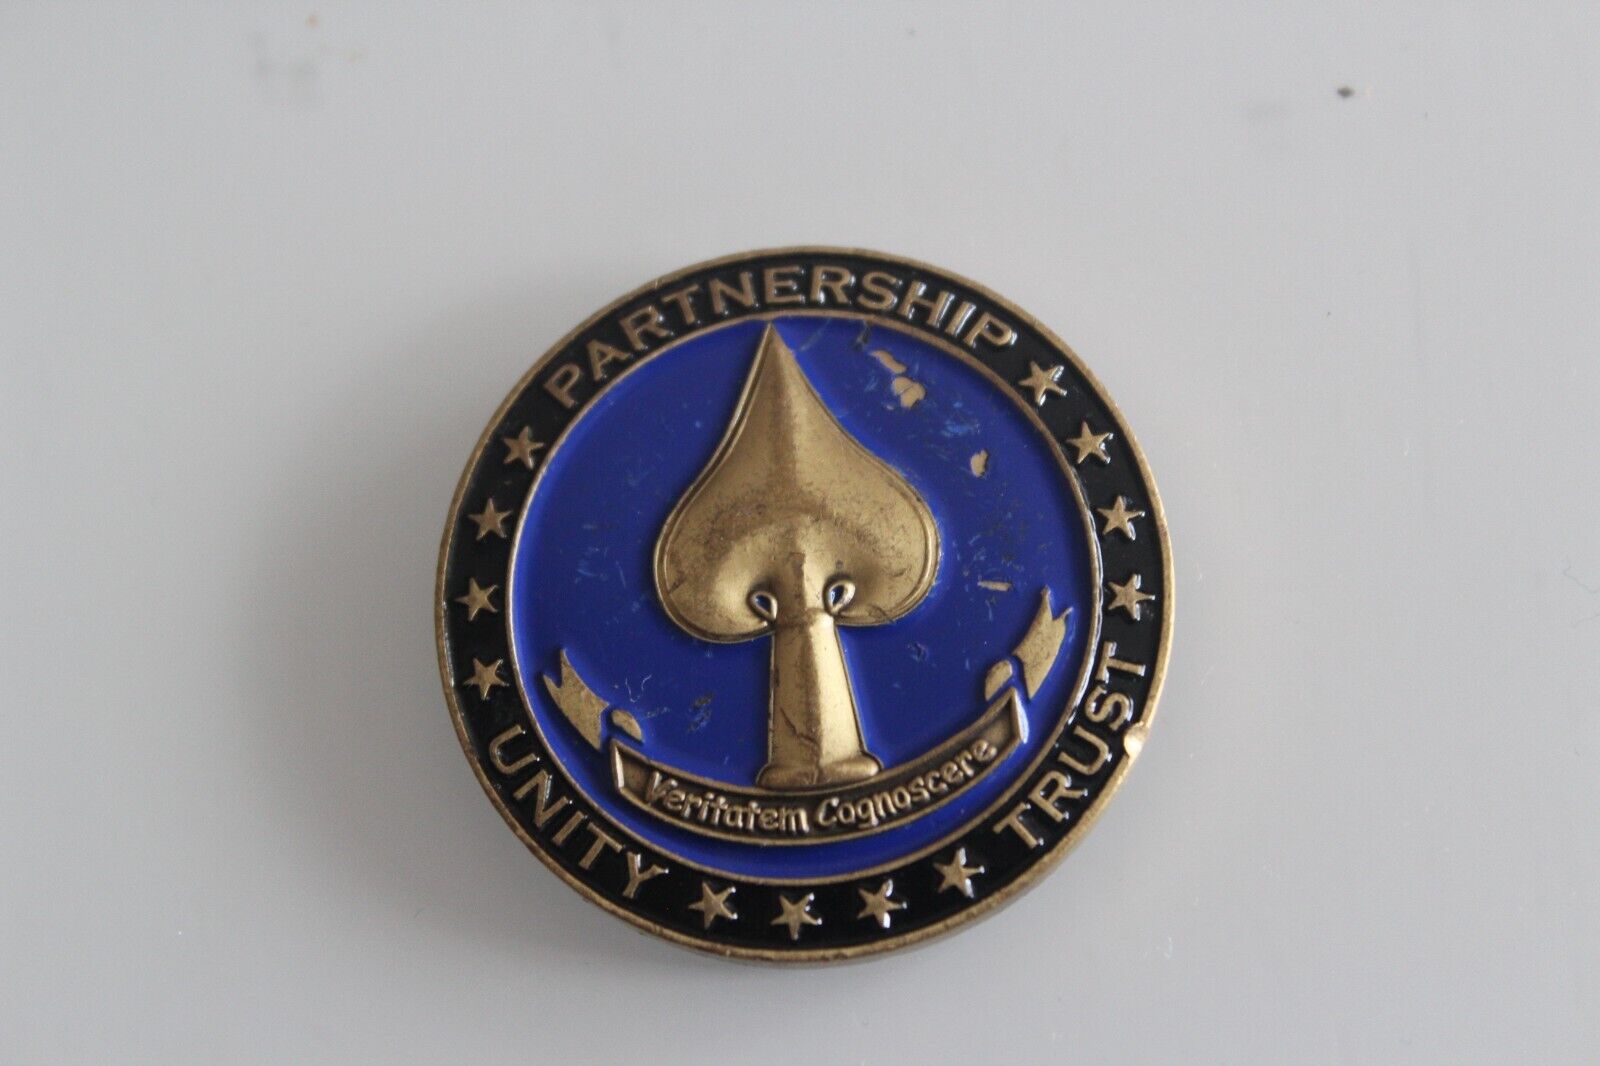 CIA National Resources Division Challenge Coin